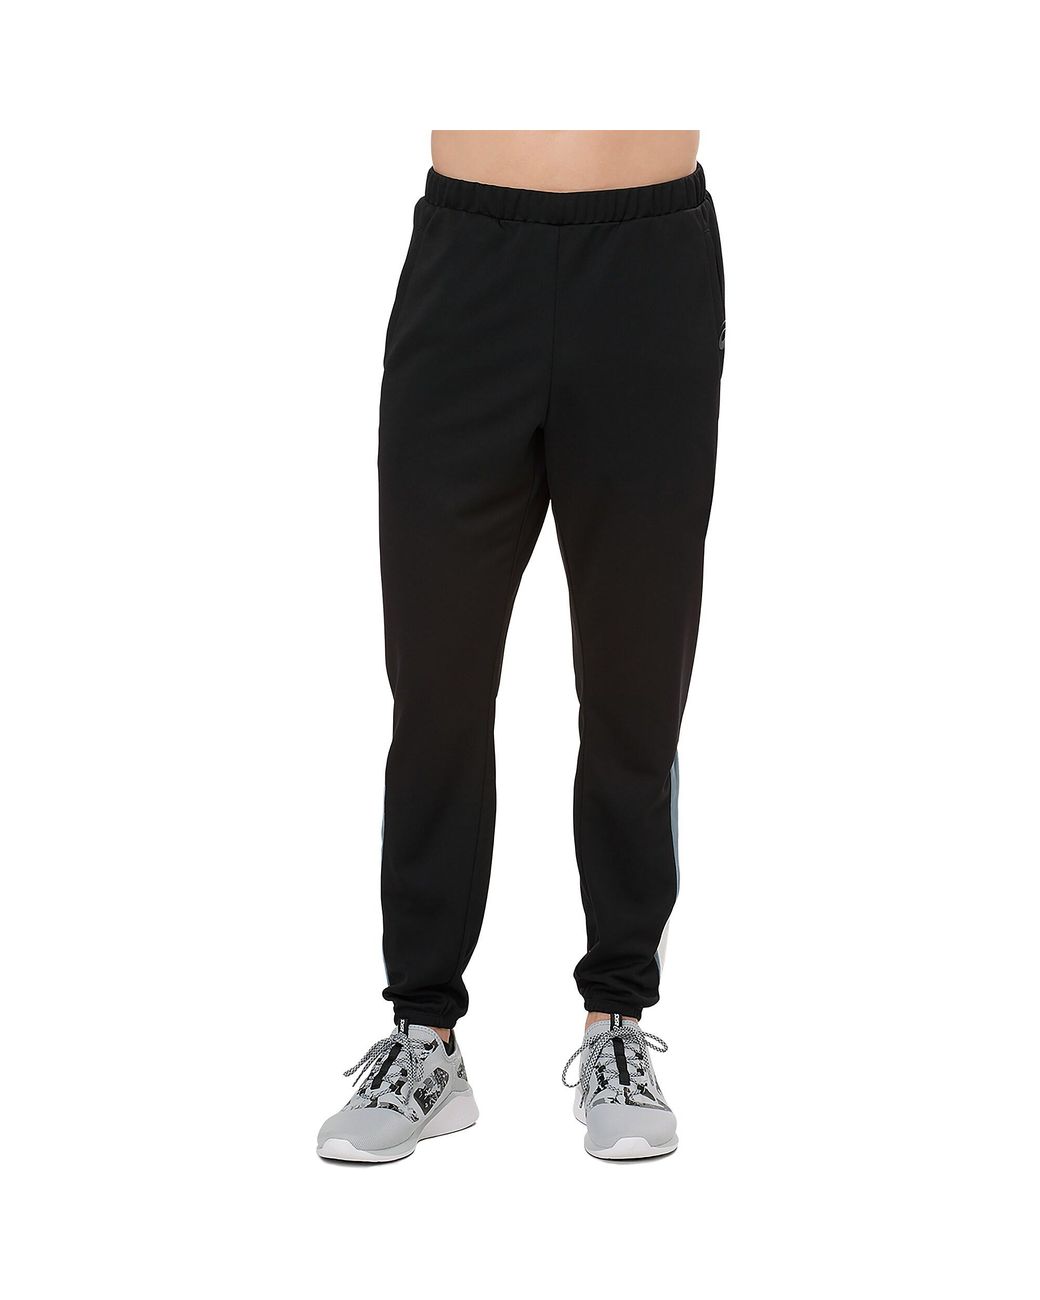 Asics Cuff Track Pants in Black for Men - Lyst